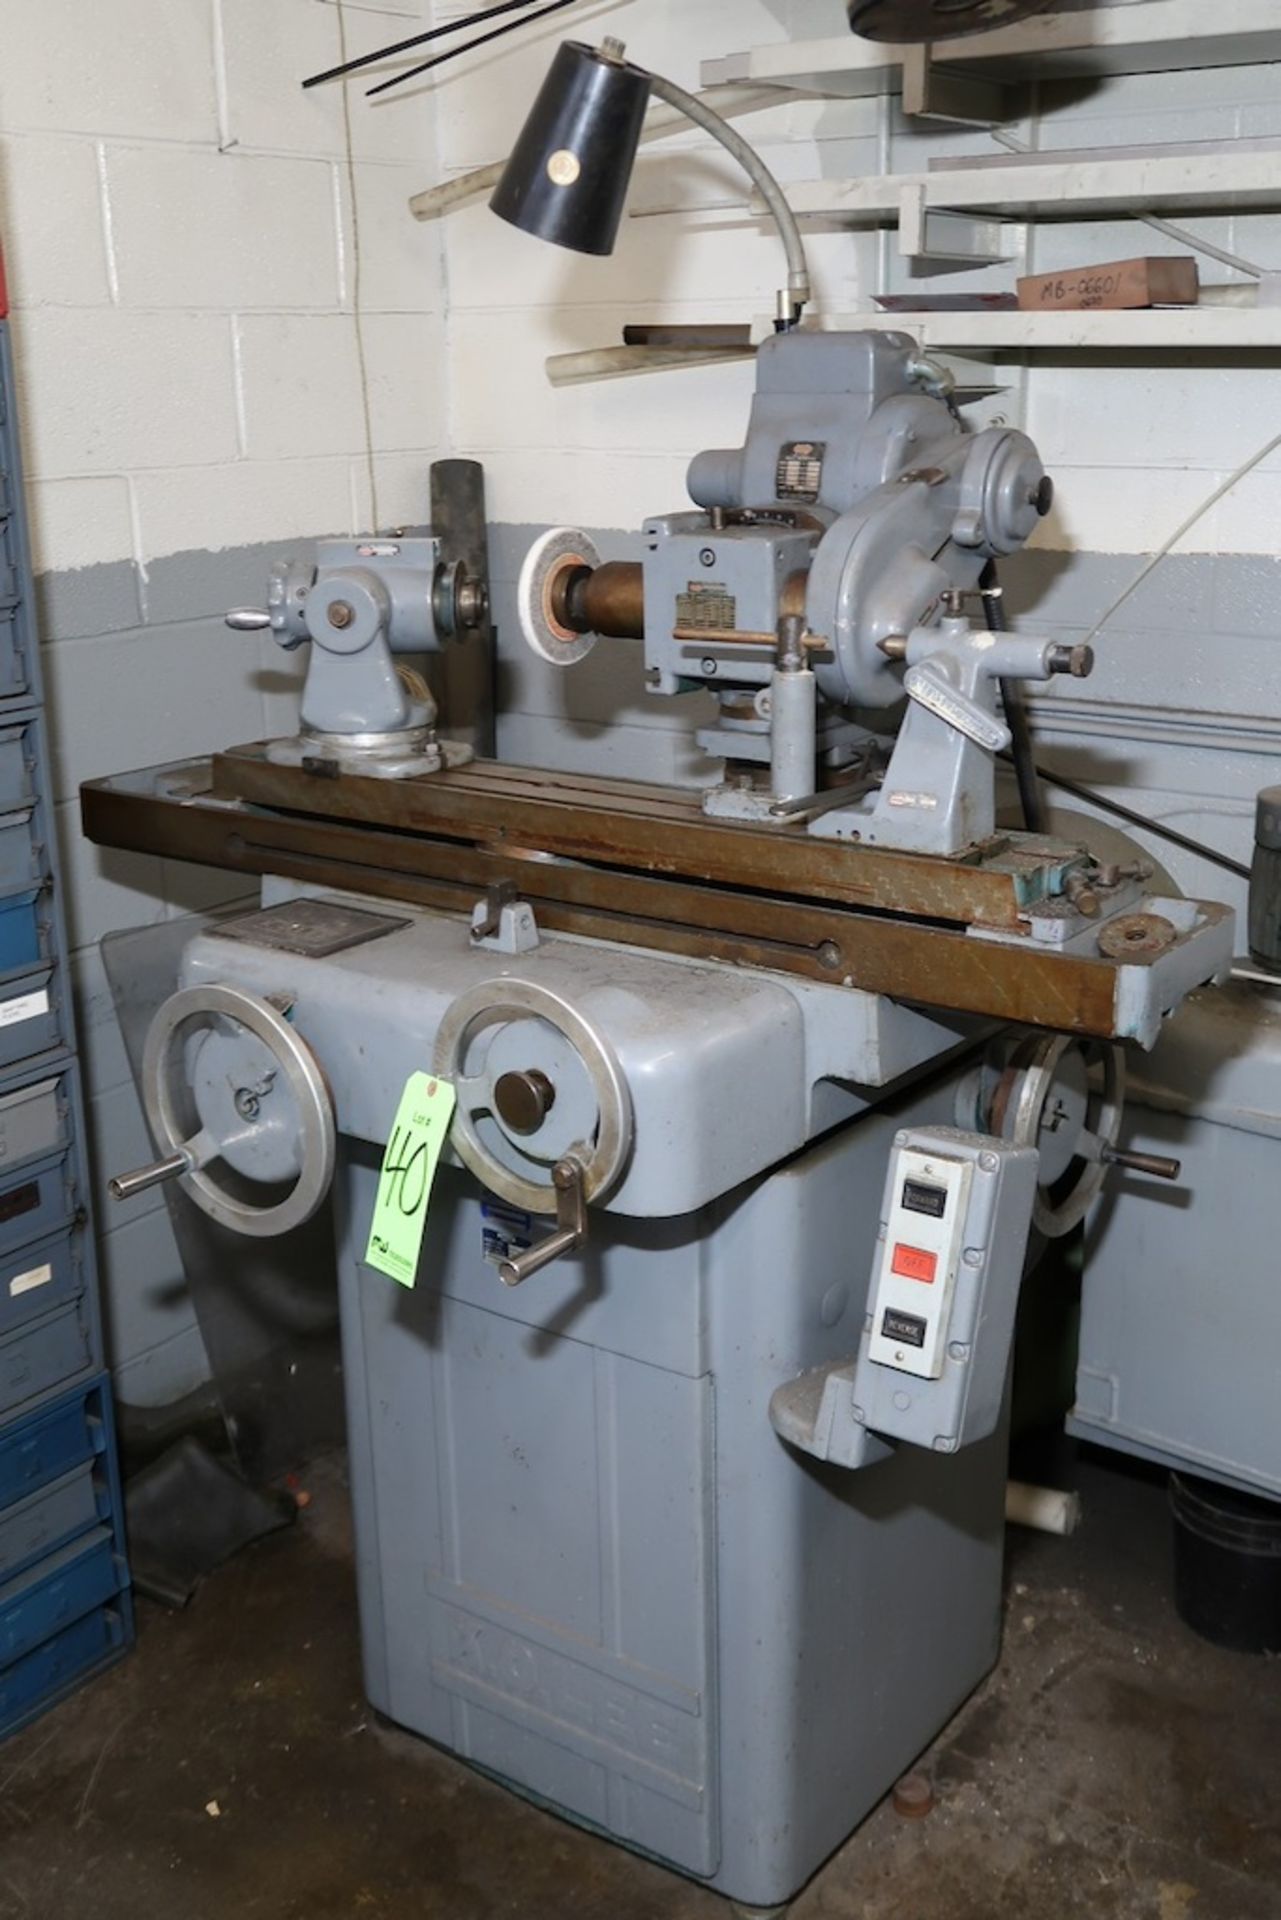 KO Lee Tool and Cutter Grinder with Cabinet of Assorted Collets, Etc. - Image 2 of 4